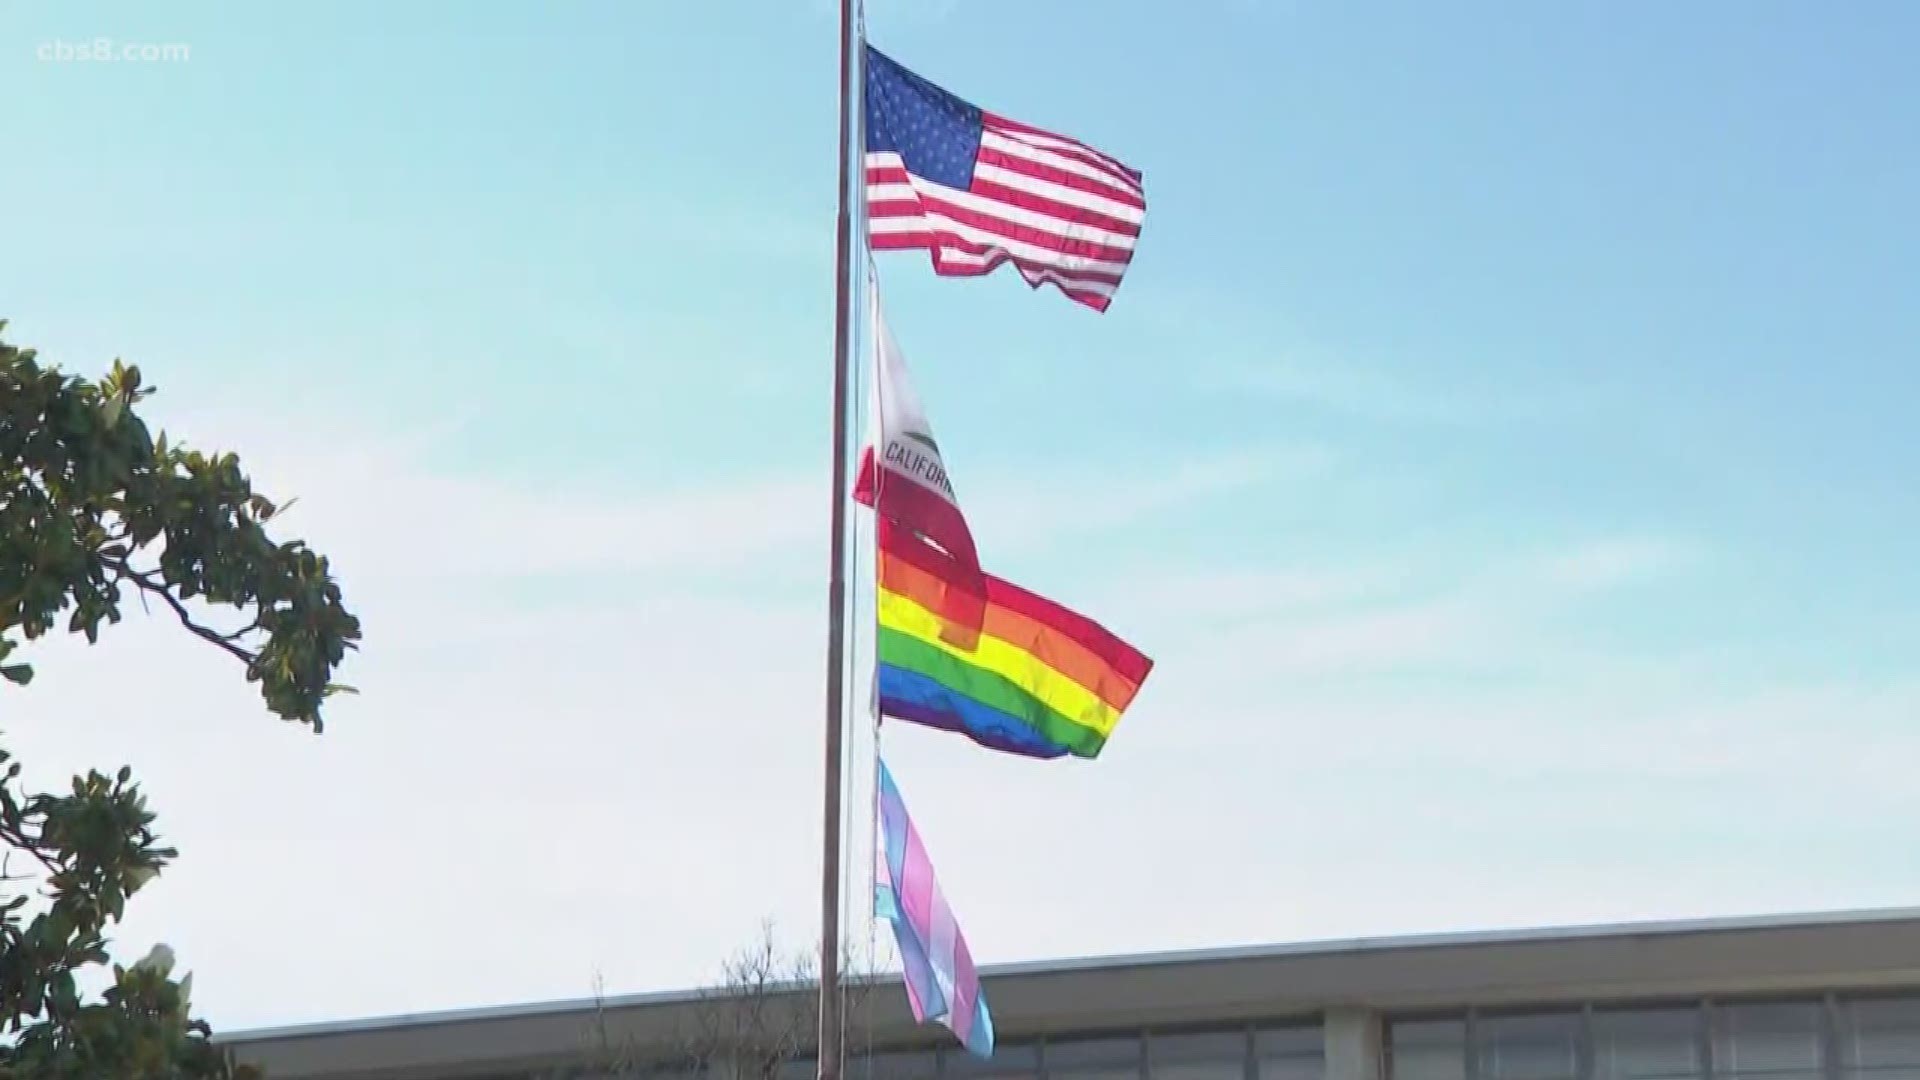 The San Diego Unified School District raised the Rainbow and Transgender Pride flags at its headquarters for the first time Friday in support of Pride Month.